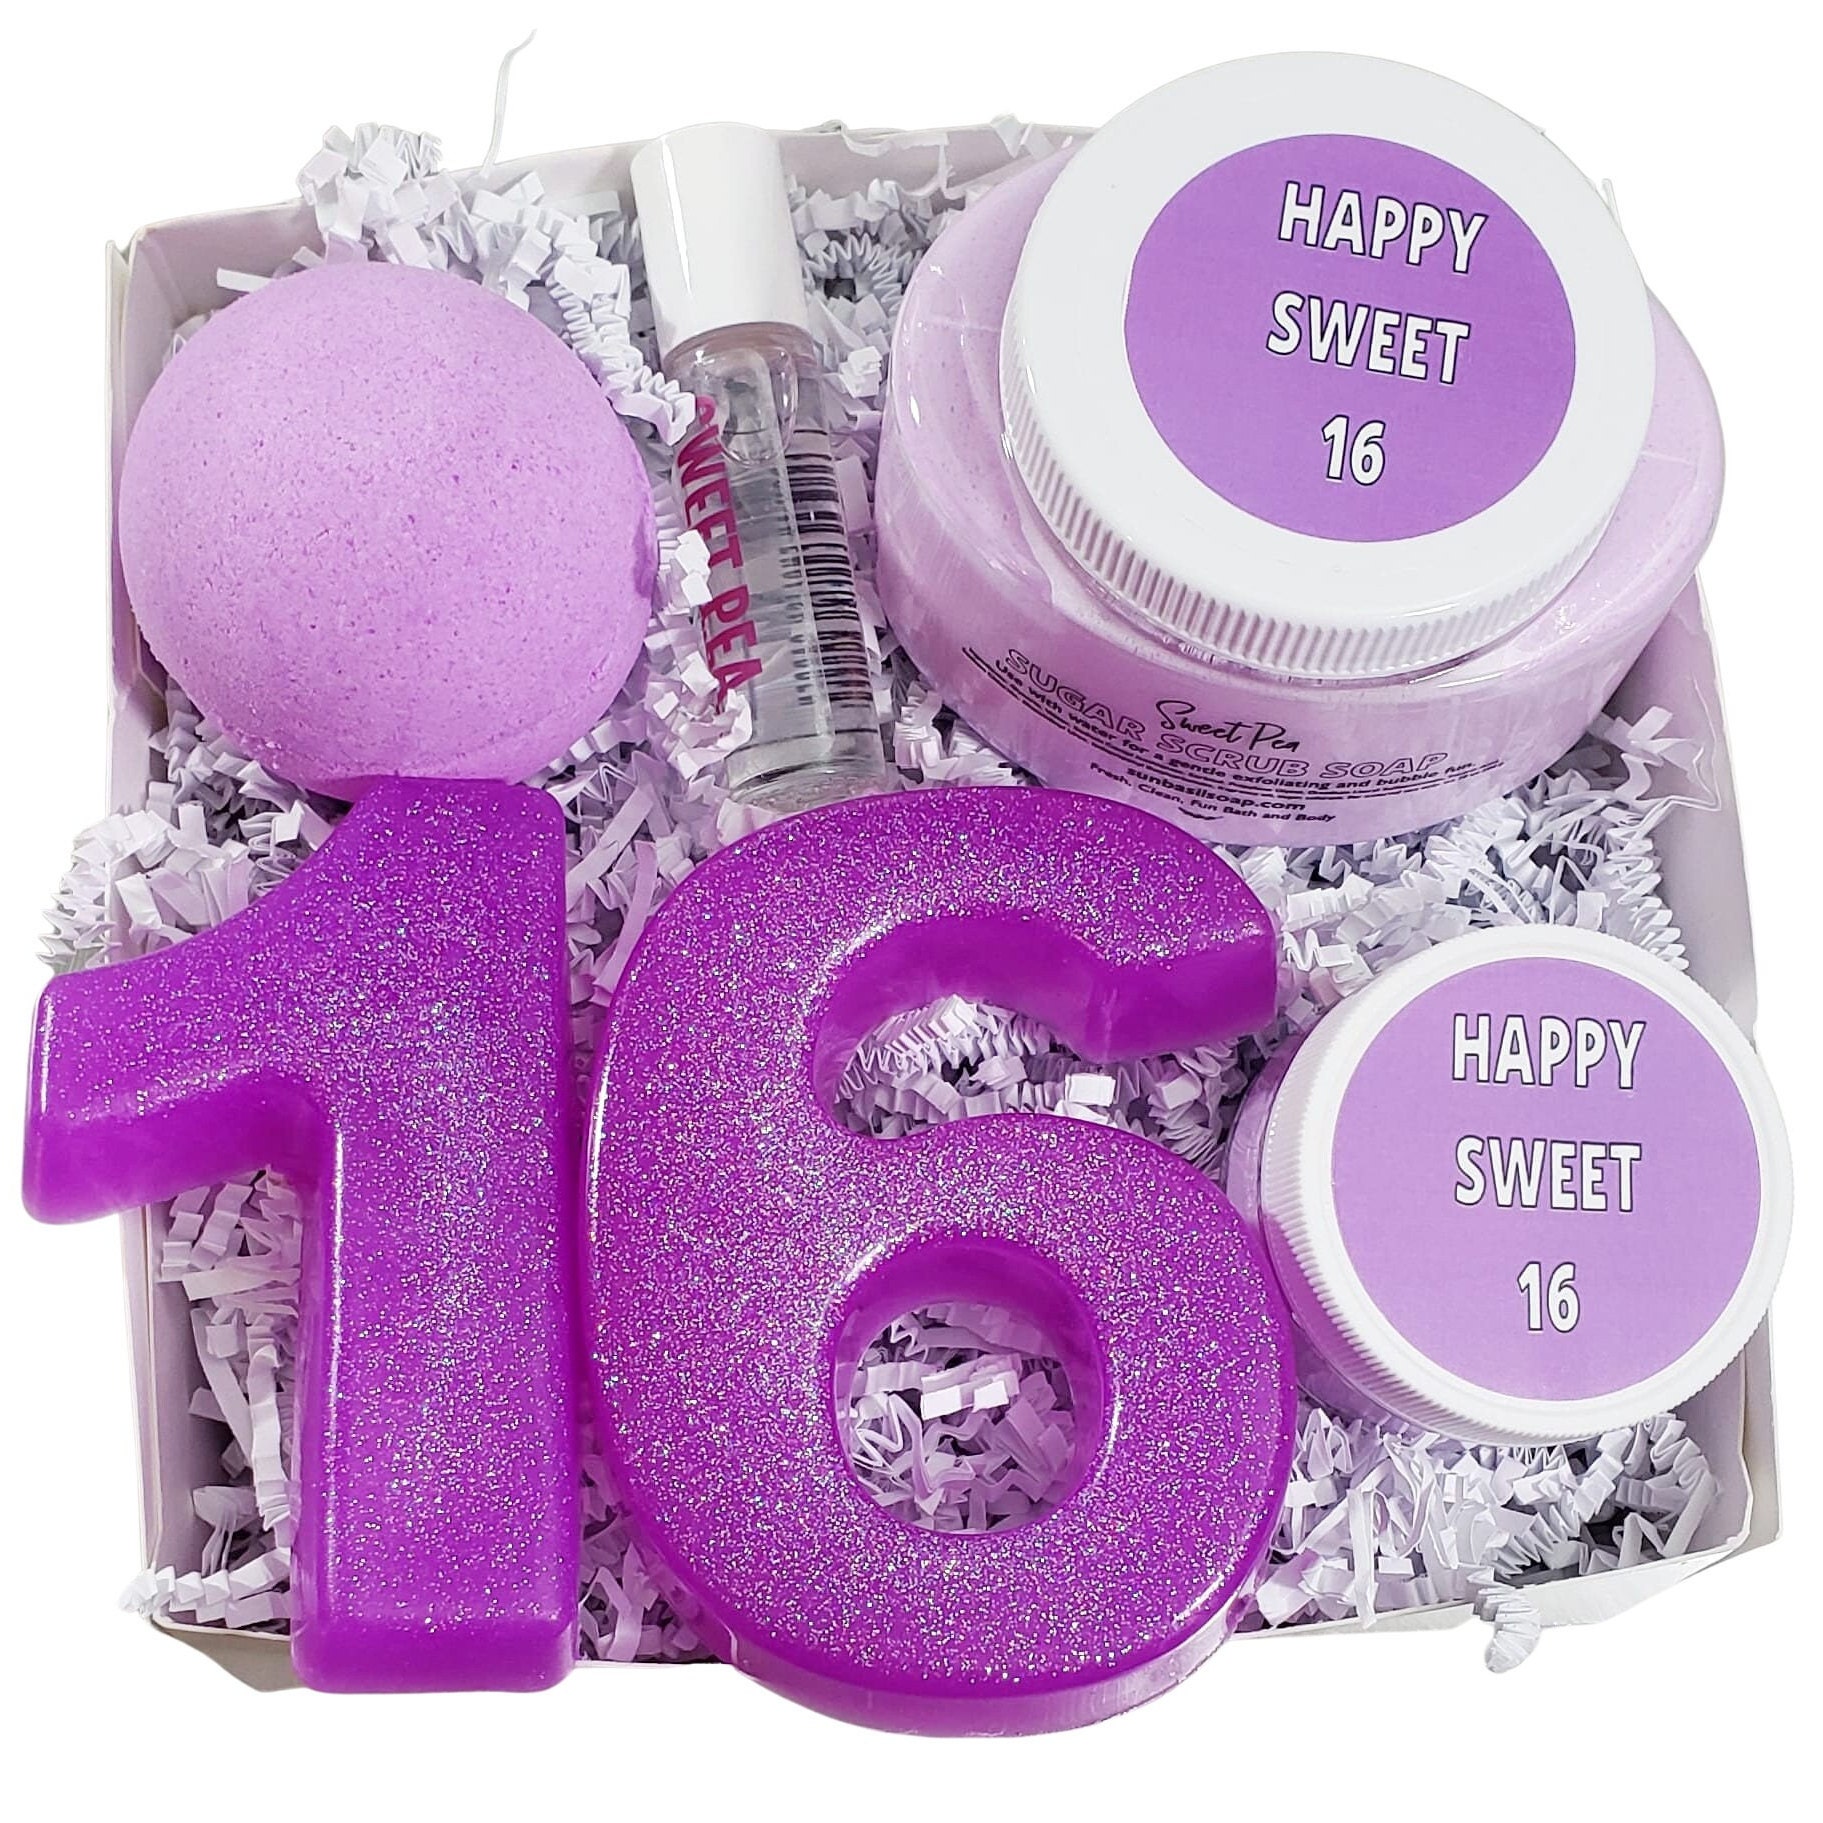 Sweet 16 Gifts for Girls, Gifts for 16 Year Old Girl, 16th Birthday Gifts for Girls, 16 Year Old Girl Birthday Gift Ideas, Sweet Sixteen Decorations